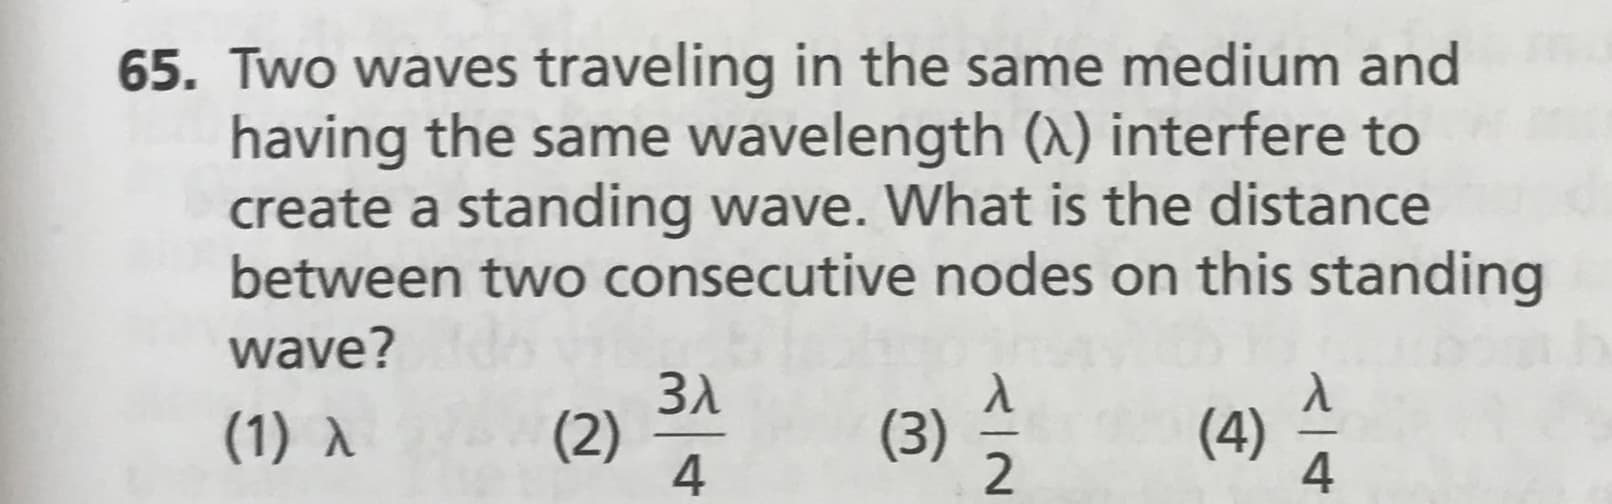 65. Two waves traveling in the same medium and
having the same wavelength (X) interfere to
create a standing wave. What is the distance
between two consecutive nodes on this standing
wave?
Зл
(2)
4
(4)
4
(1) A
(3)
